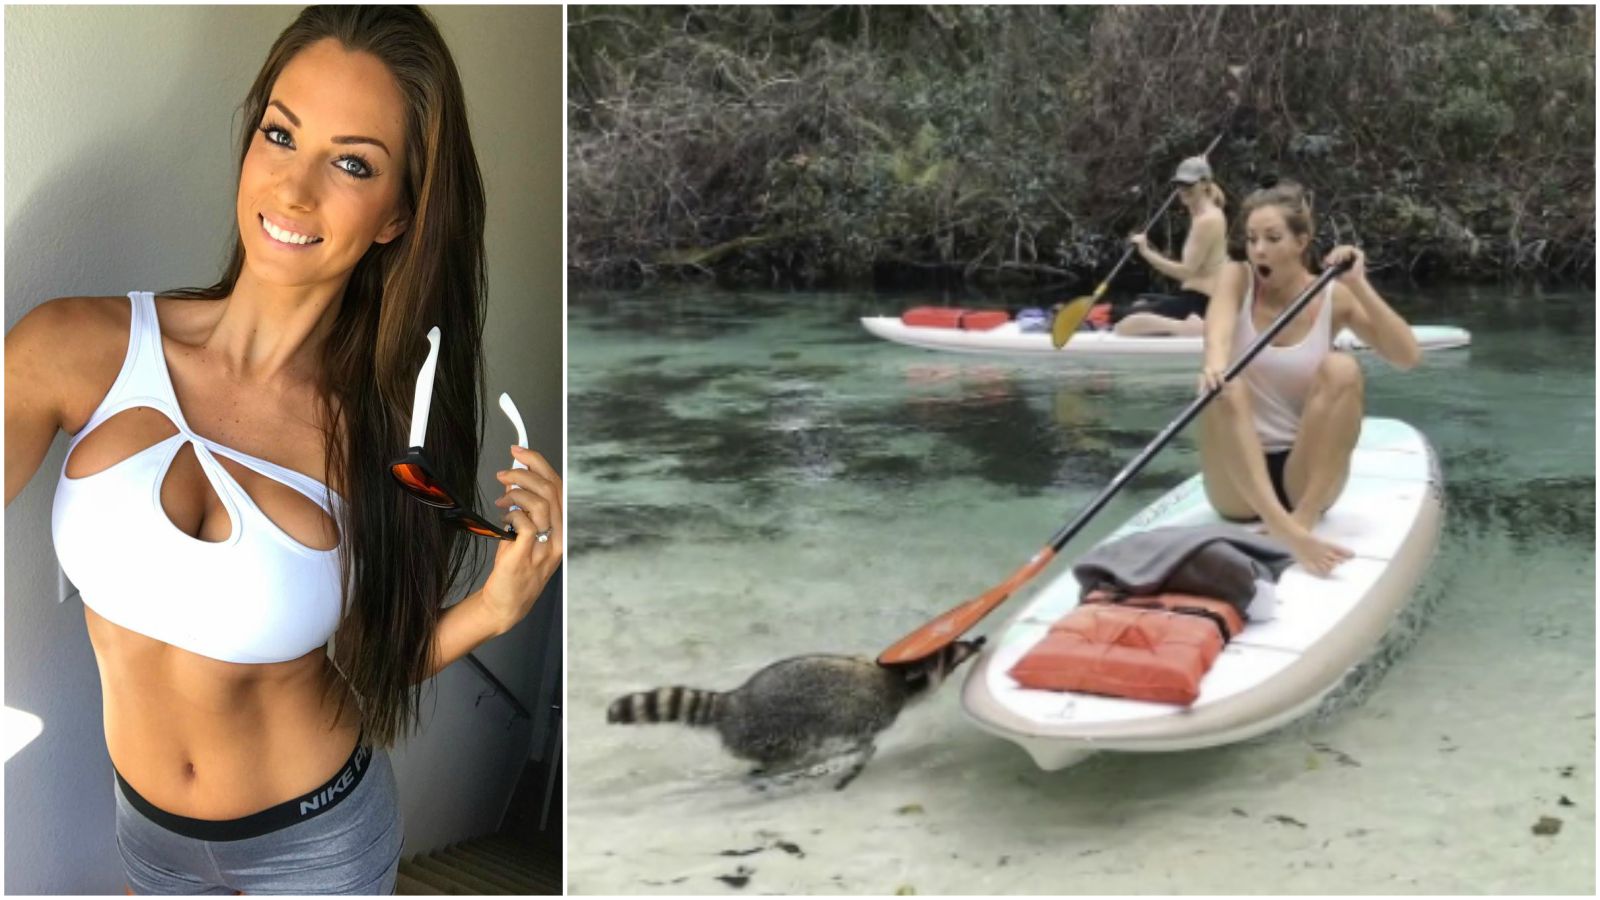 Raccoon on a Mission Tries to Steal Fitness Model’s Lunch During Florida Trip